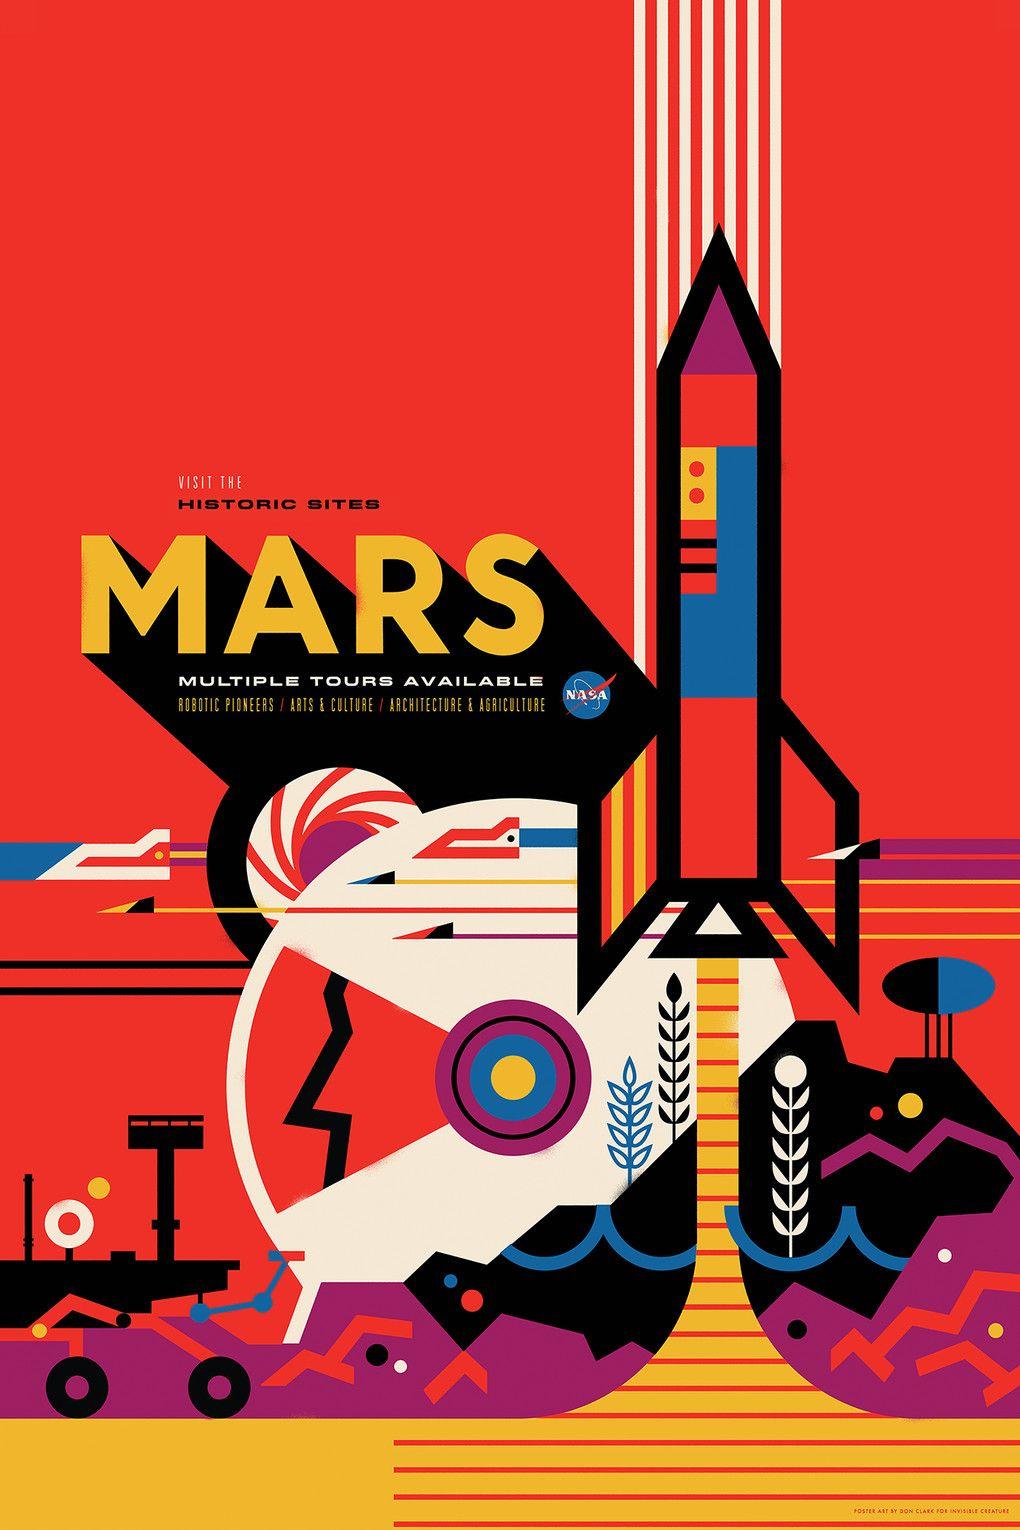 NASA releases even more of its fantastical space tourism posters